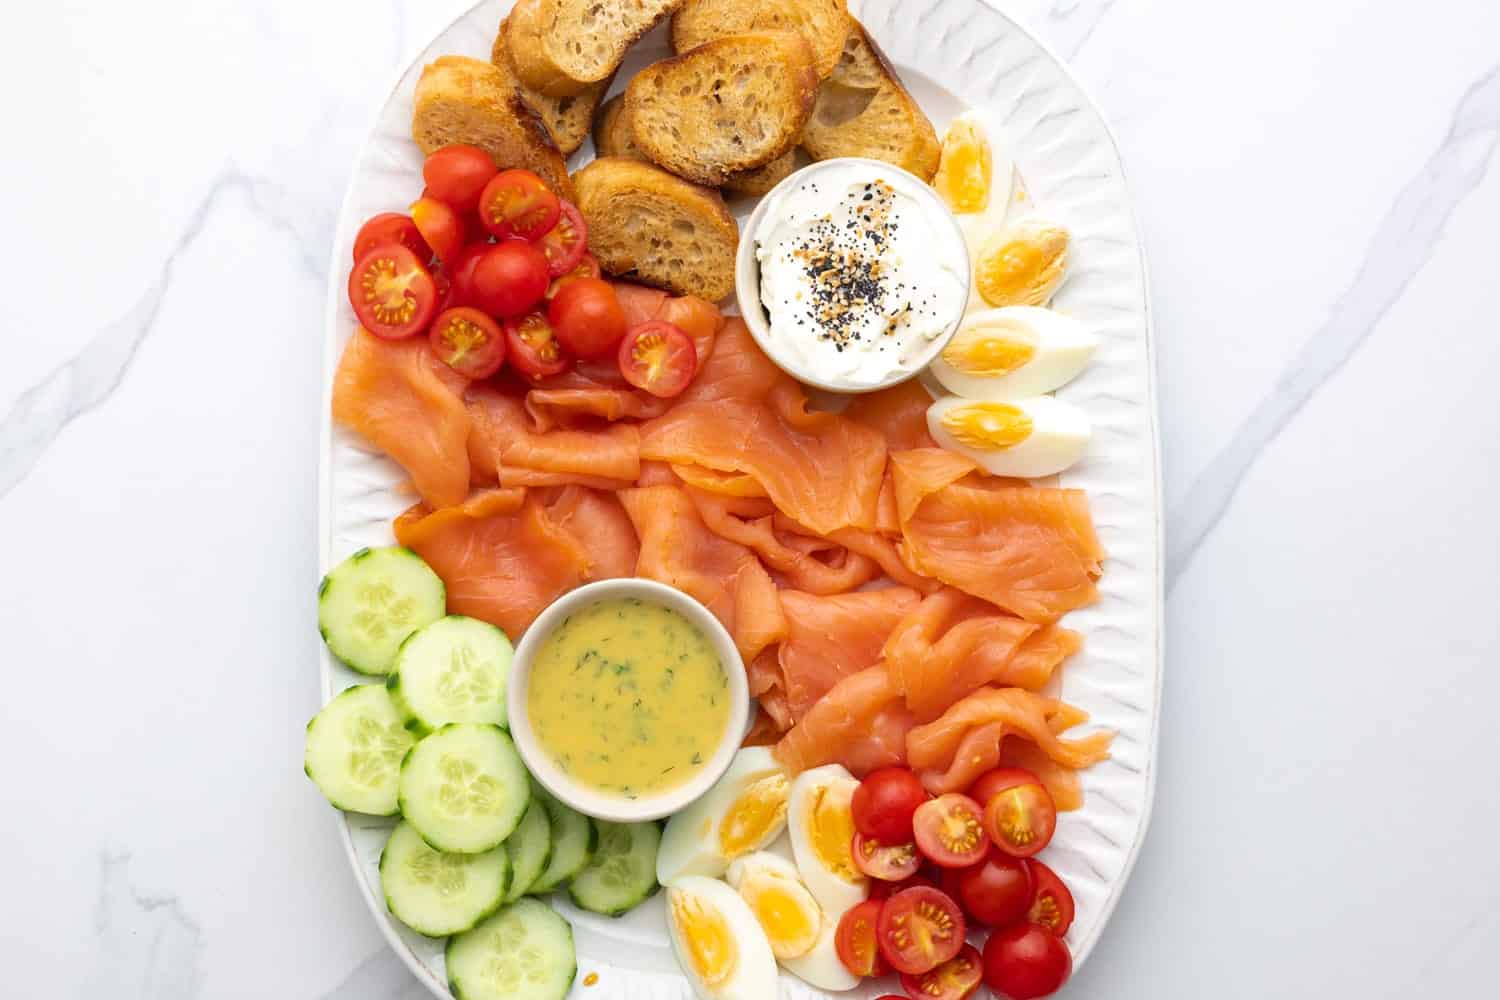 Smoked Salmon Platter with fresh vegetables, cream cheese, dill sauce, hard boiled eggs, and crostini.